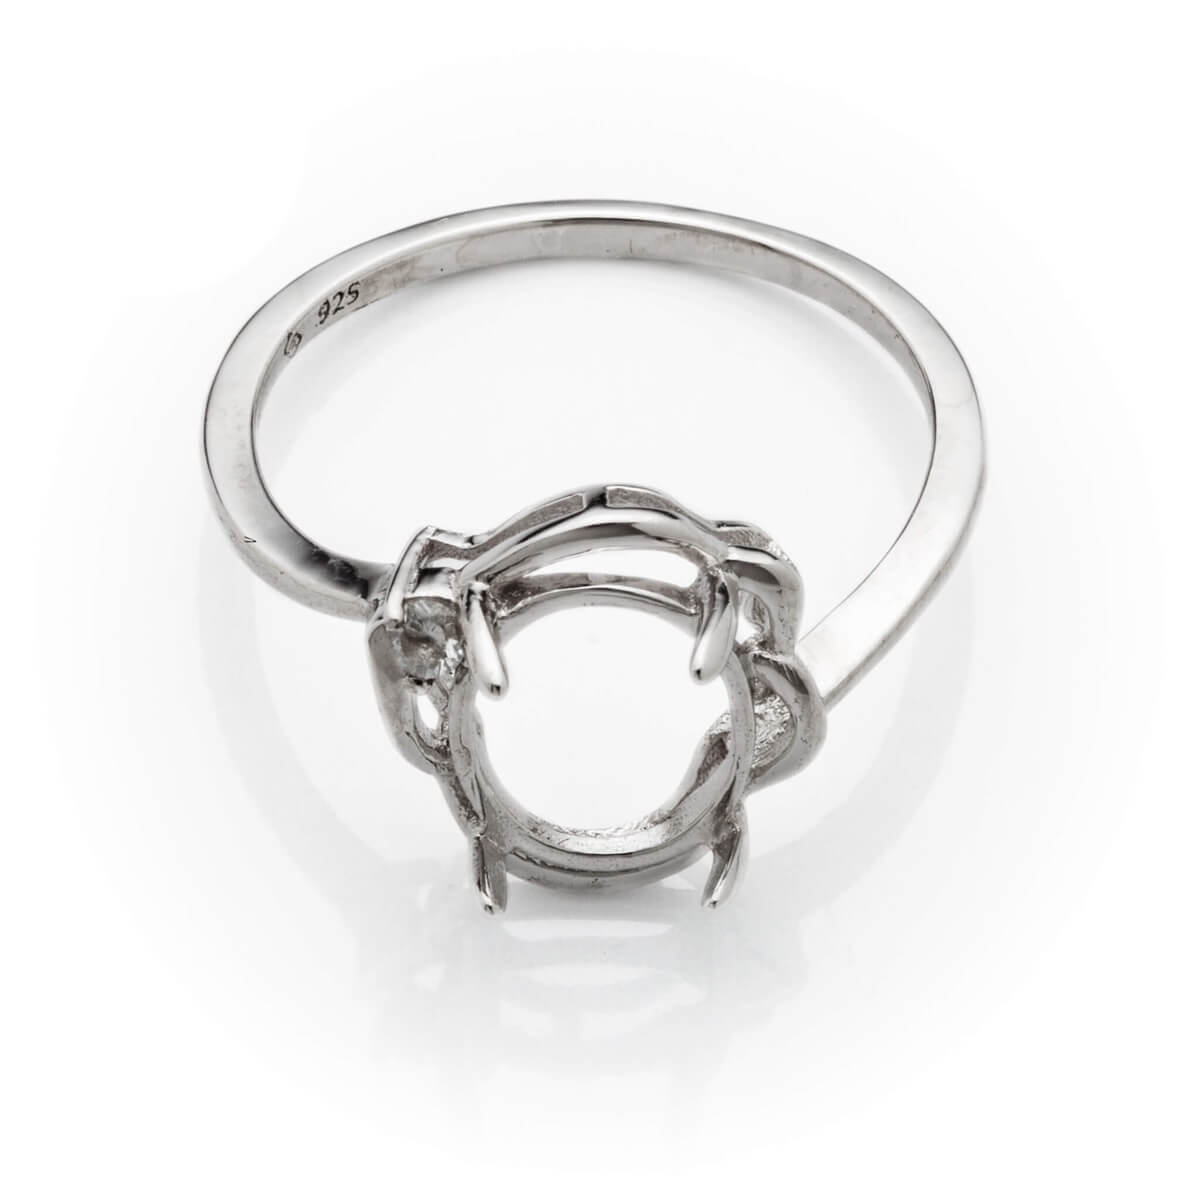 Dolly Cross-Over Ring with Cubic Zirconia Inlays and Oval Prongs Mounting in Sterling Silver 8x9mm 